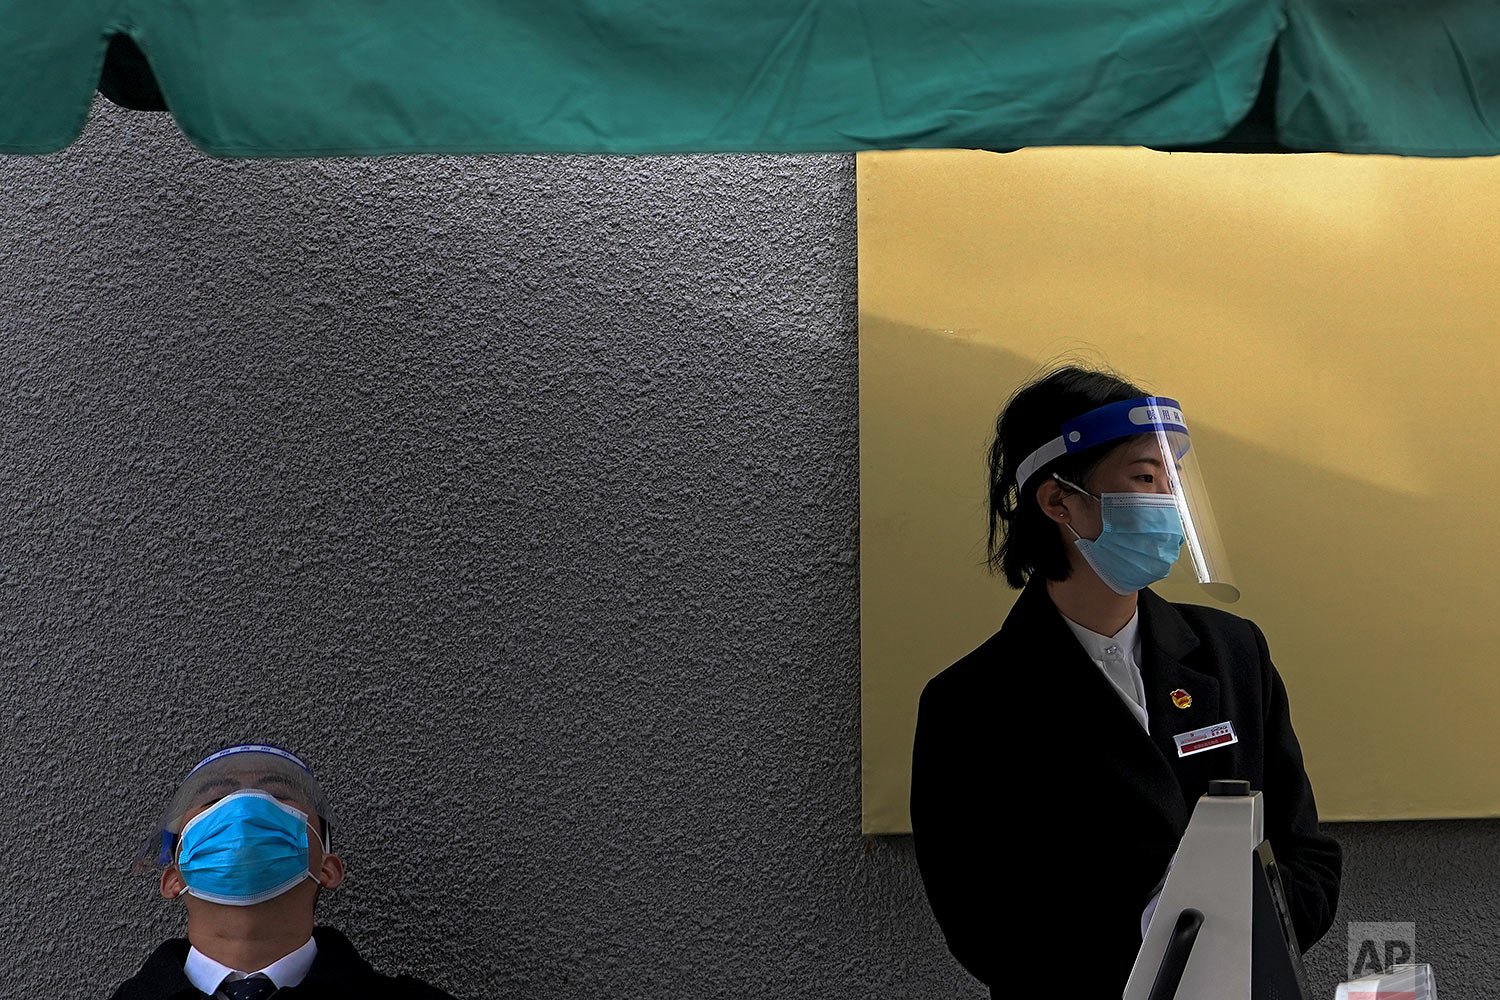  Workers wearing face masks and shields to help curb the spread of the coronavirus wait for visitors outside a museum in Beijing, Thursday, Oct. 28, 2021. (AP Photo/Andy Wong) 